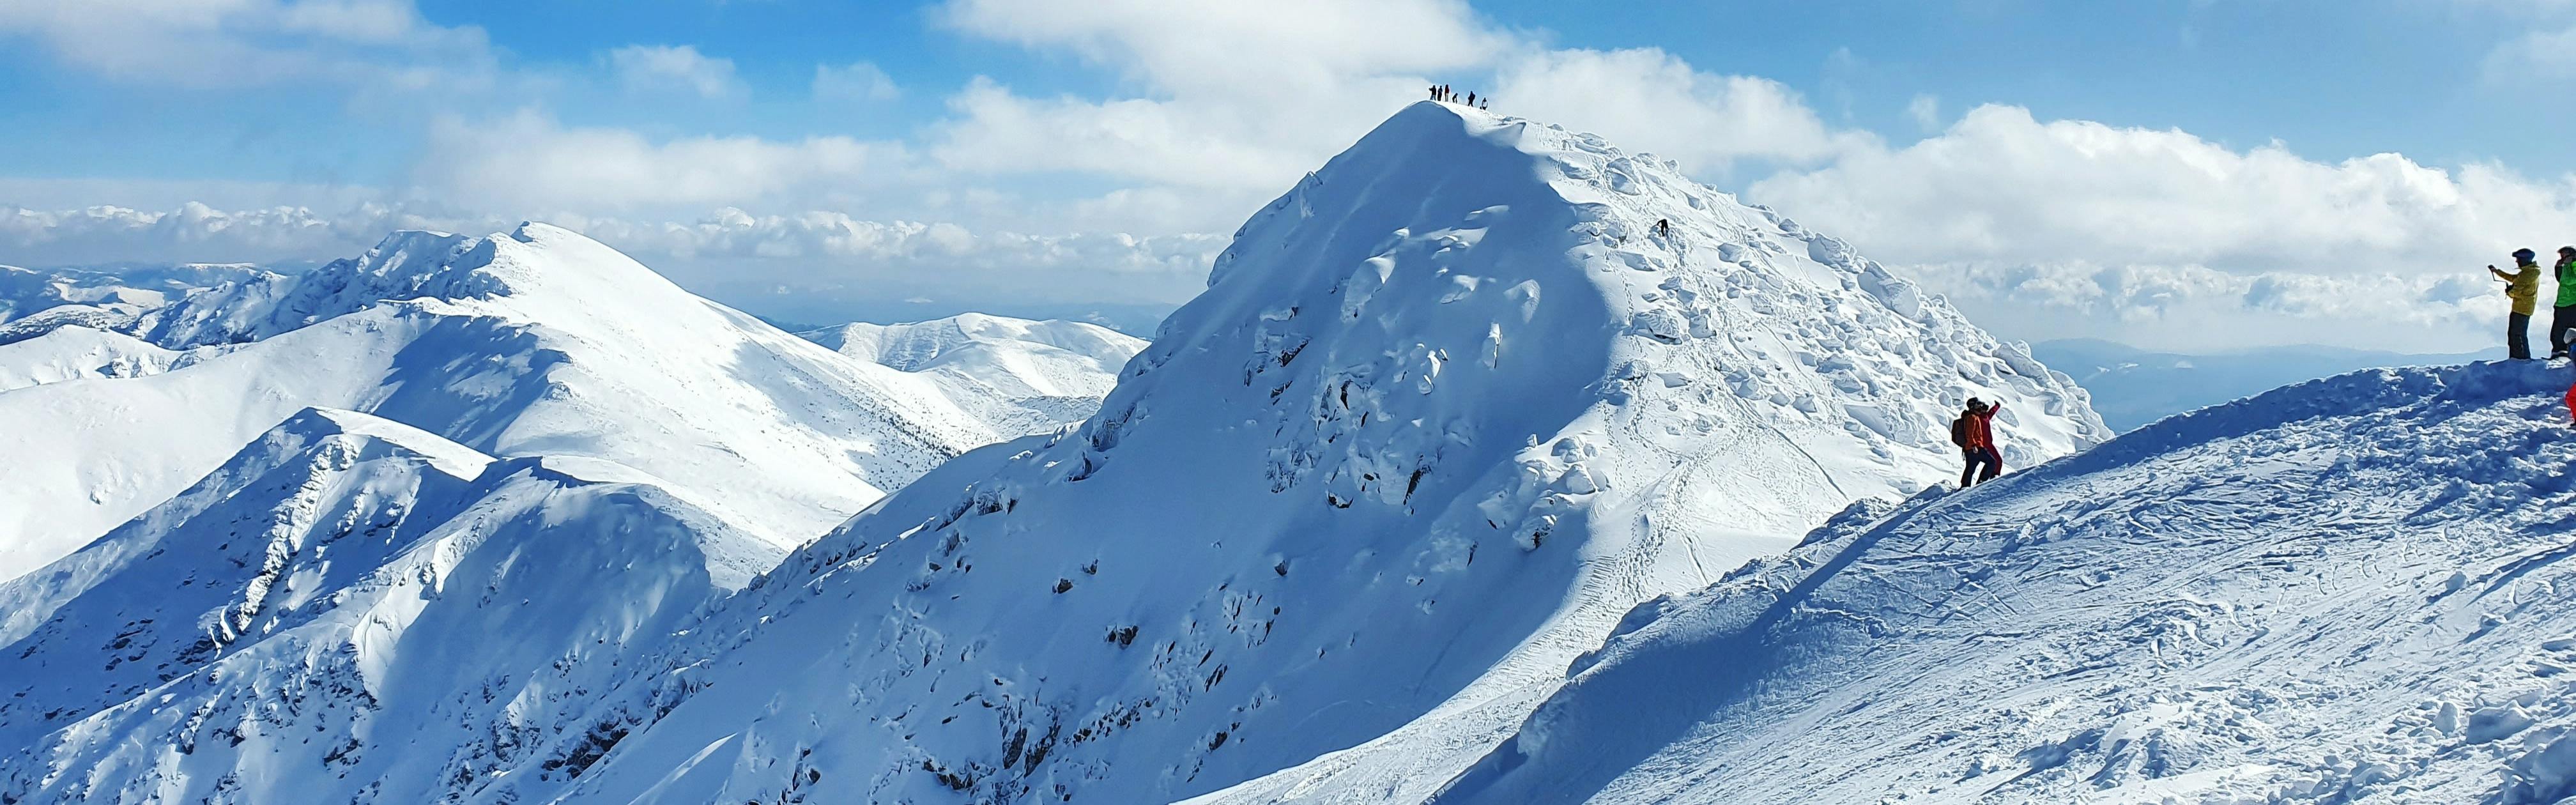 People stand on snowy mountaintops preparing to ski down them.